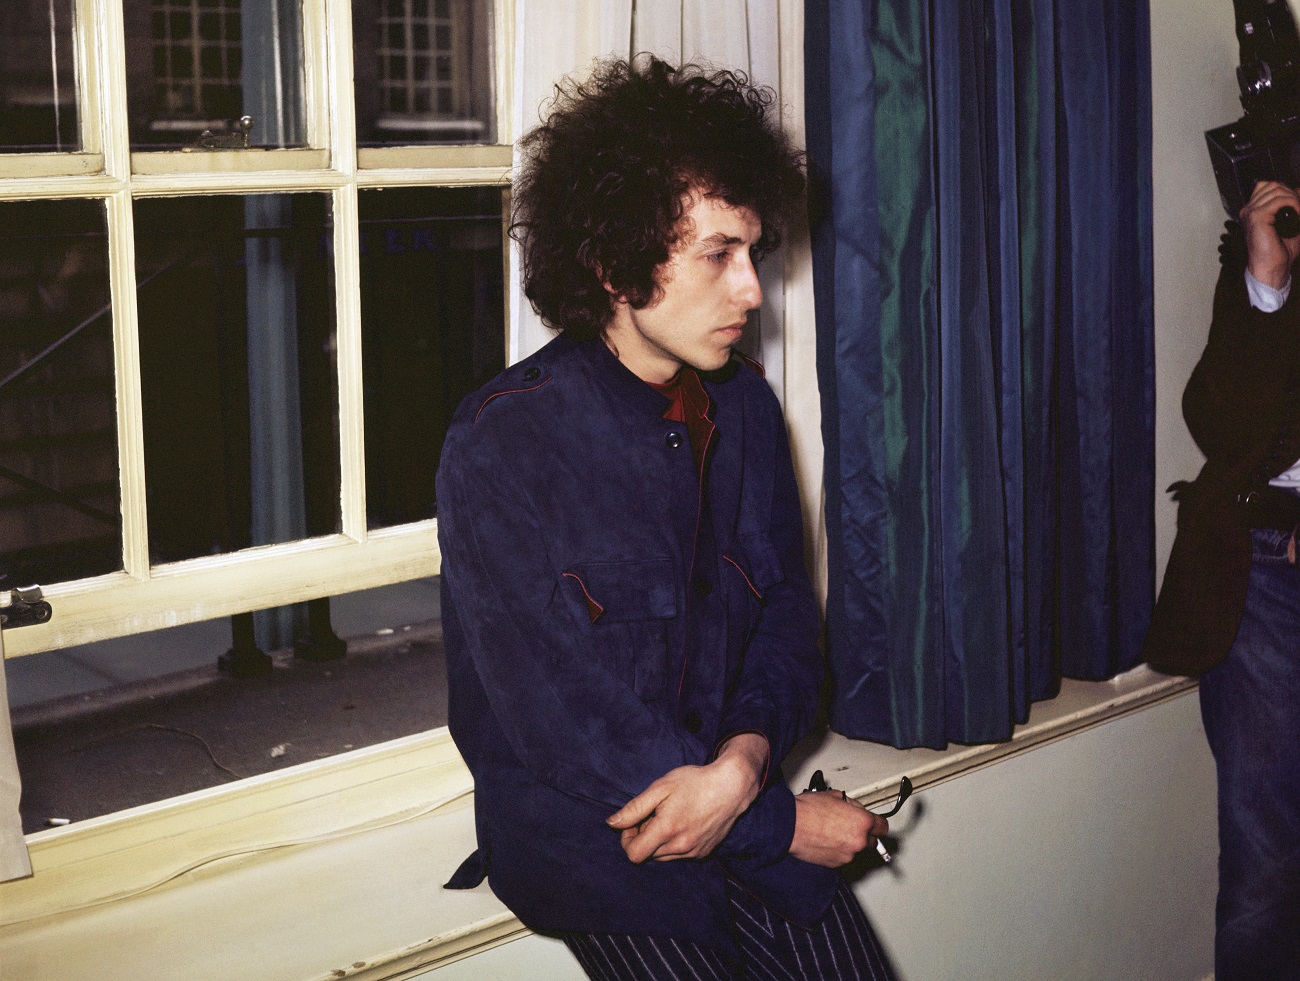 Bob Dylan leans on a window ledge and holds a cigarette.